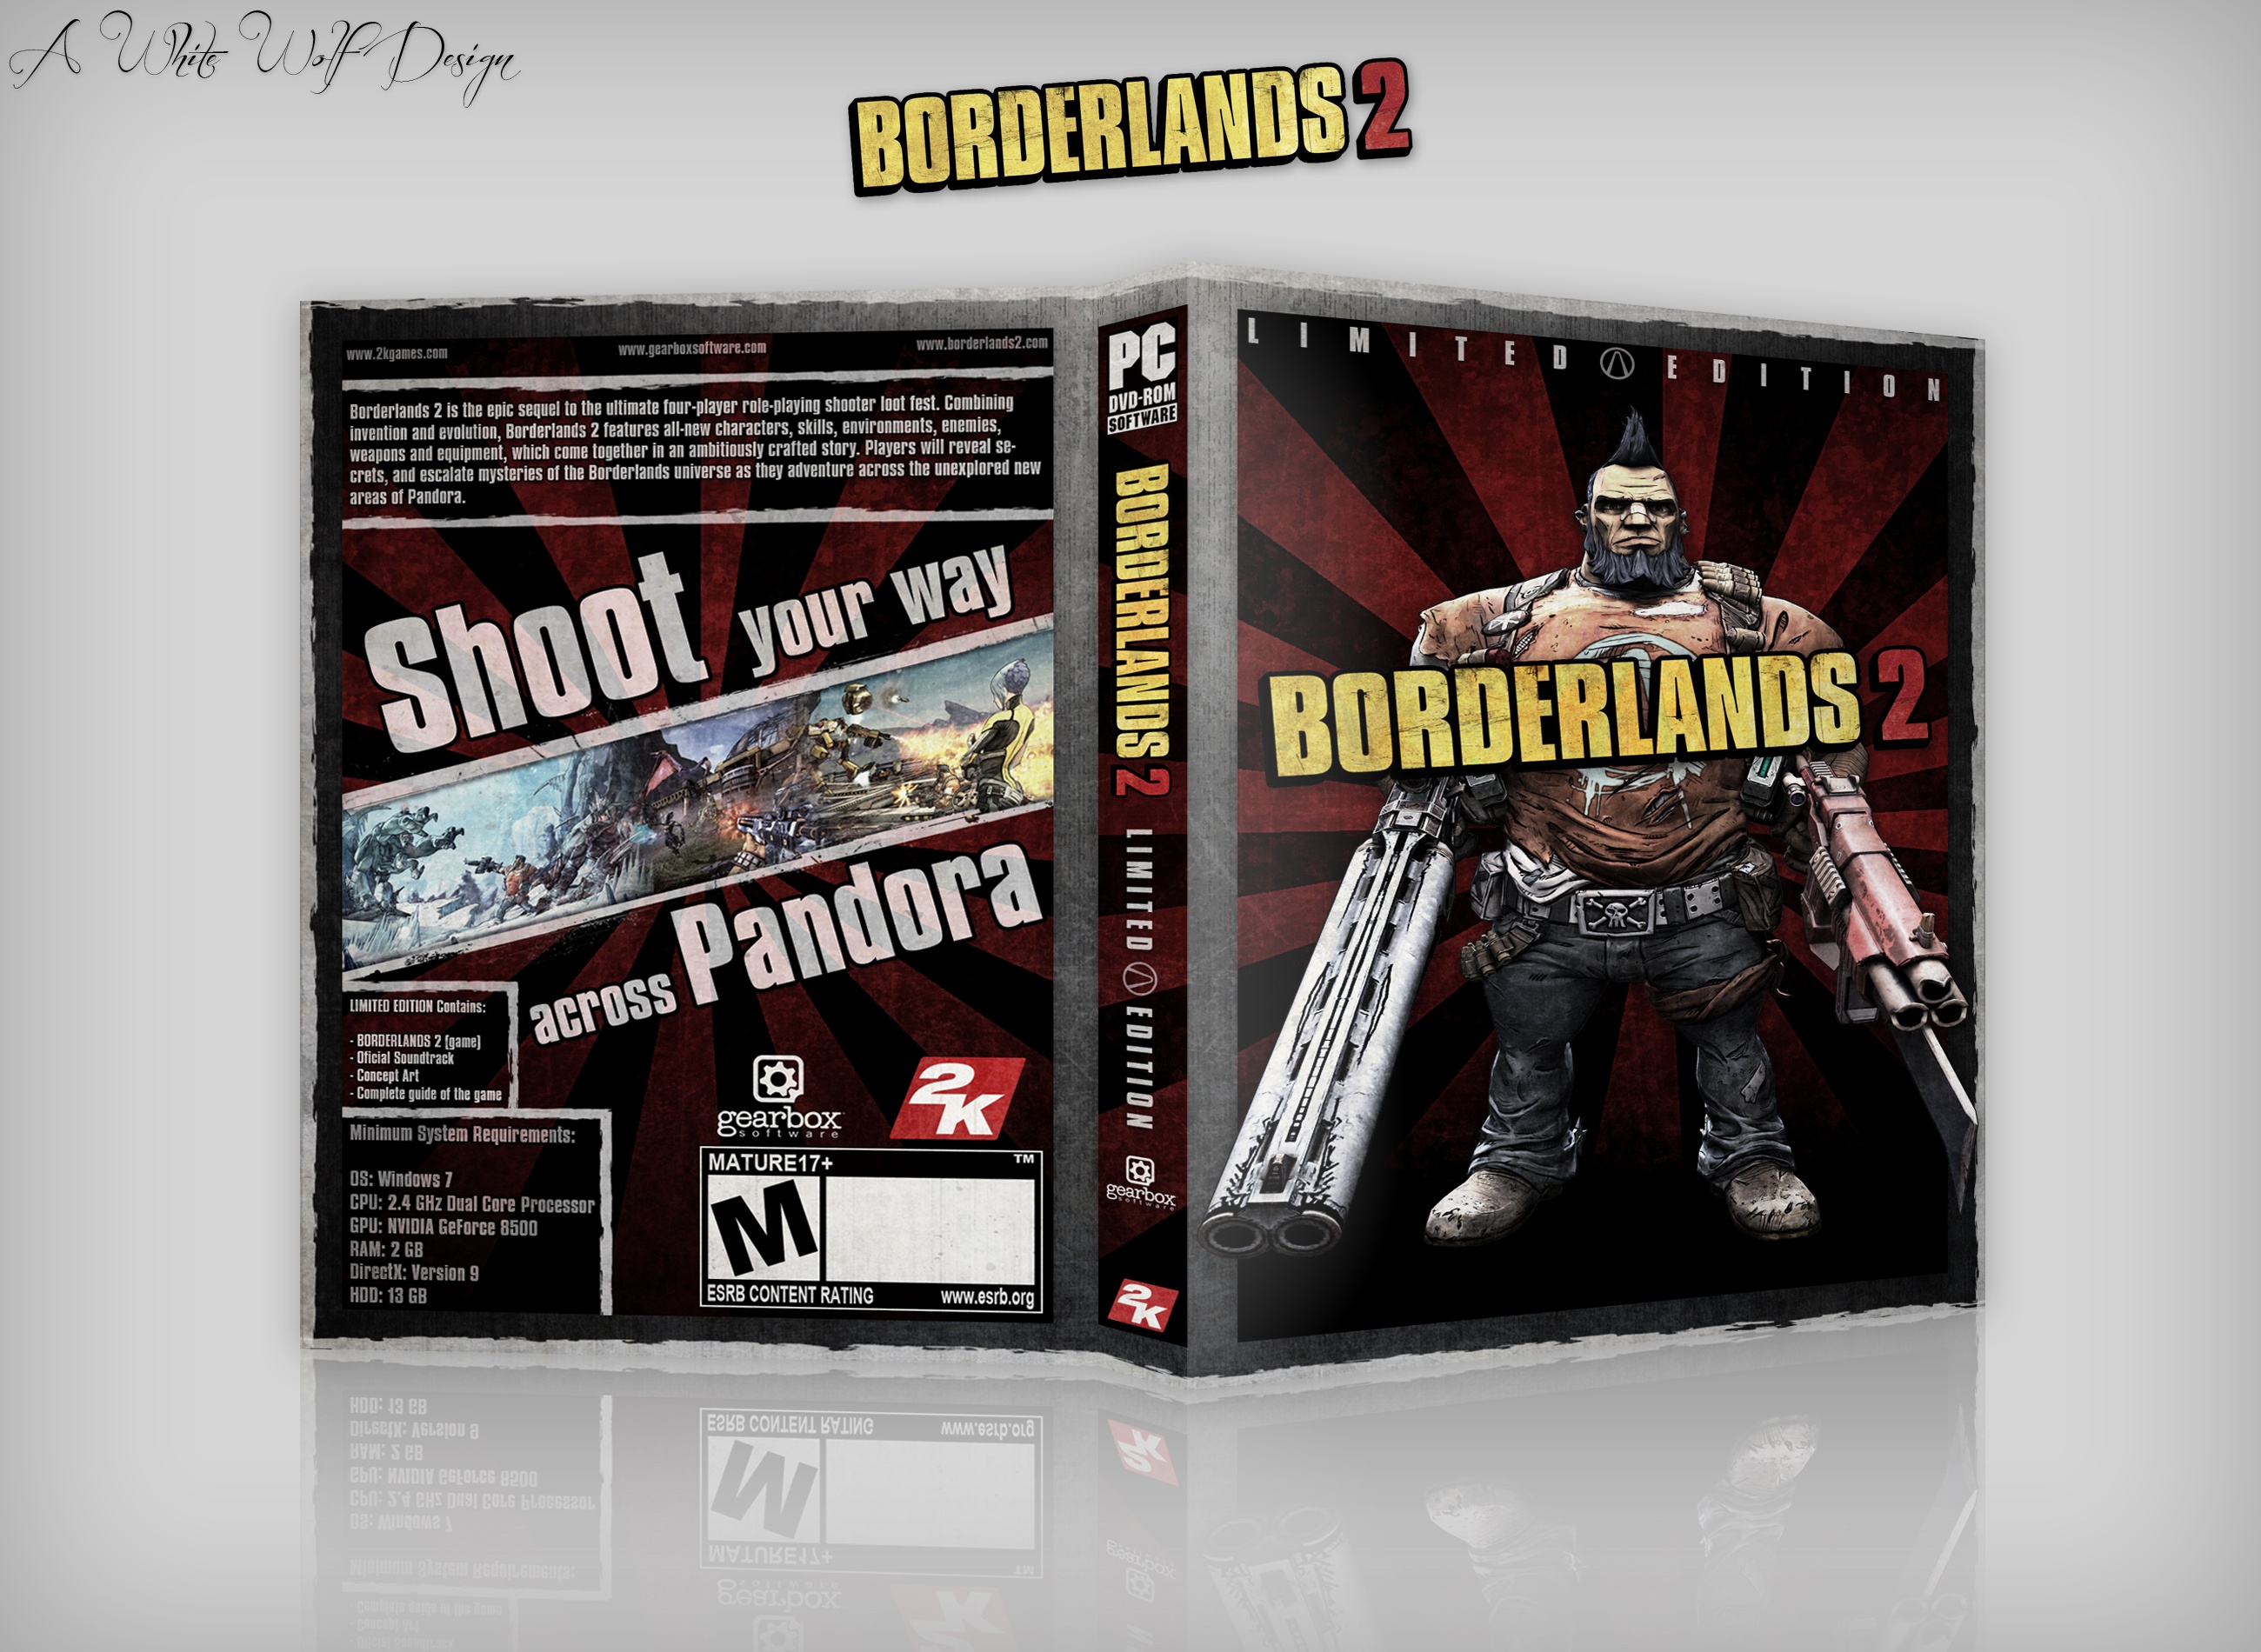 Borderlands 2 Limited Edition box cover